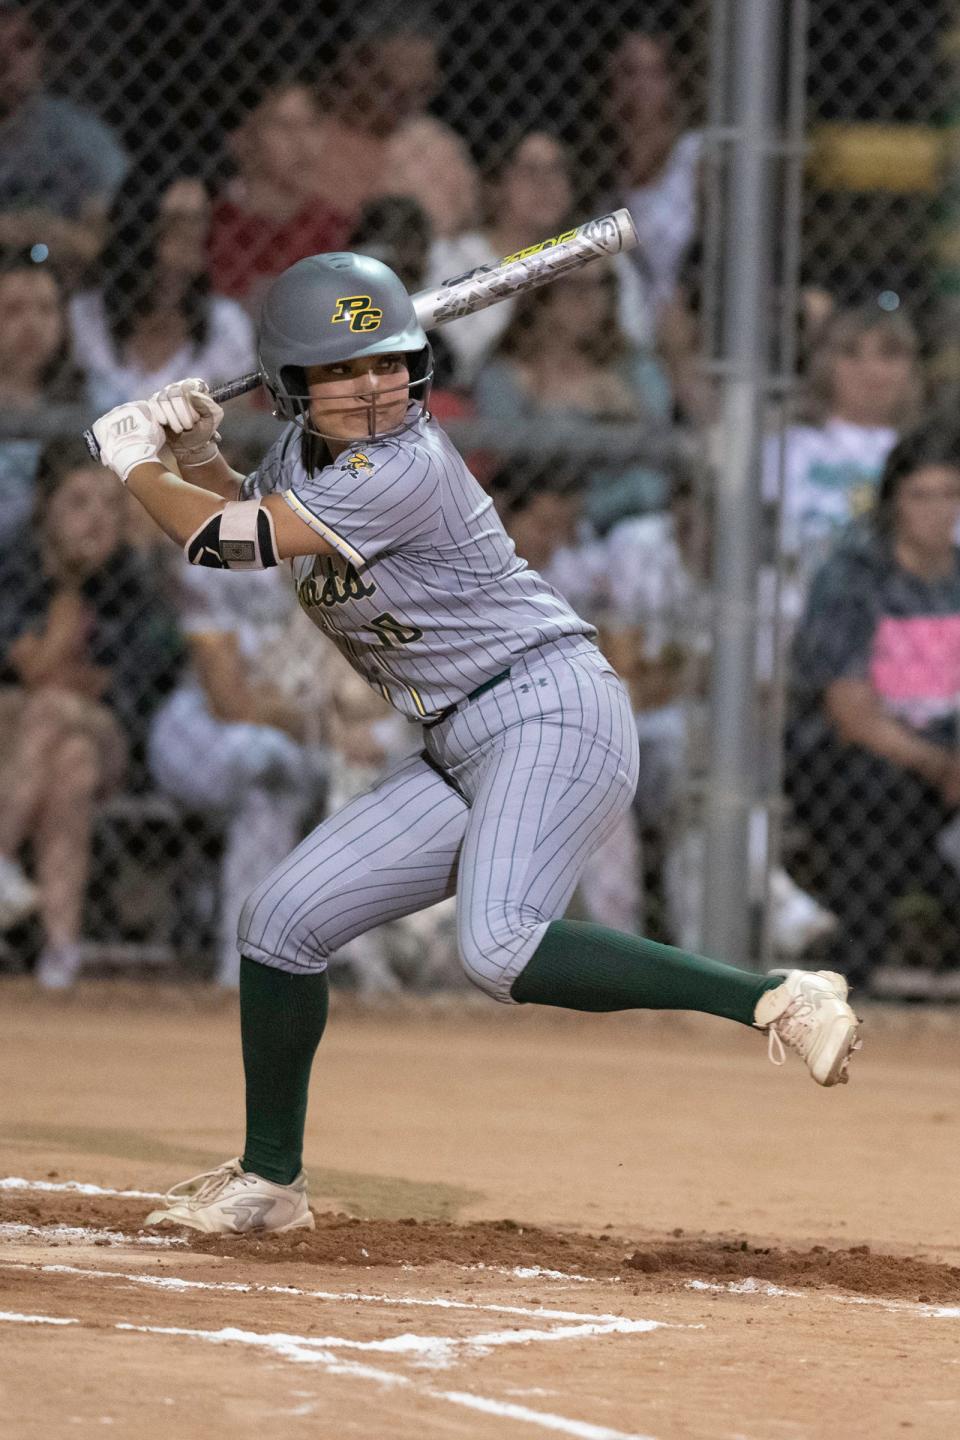 Pueblo County's Albanie Cordova prepares to swing on a pitch during a game against Pueblo East on Thursday, September 28, 2023.